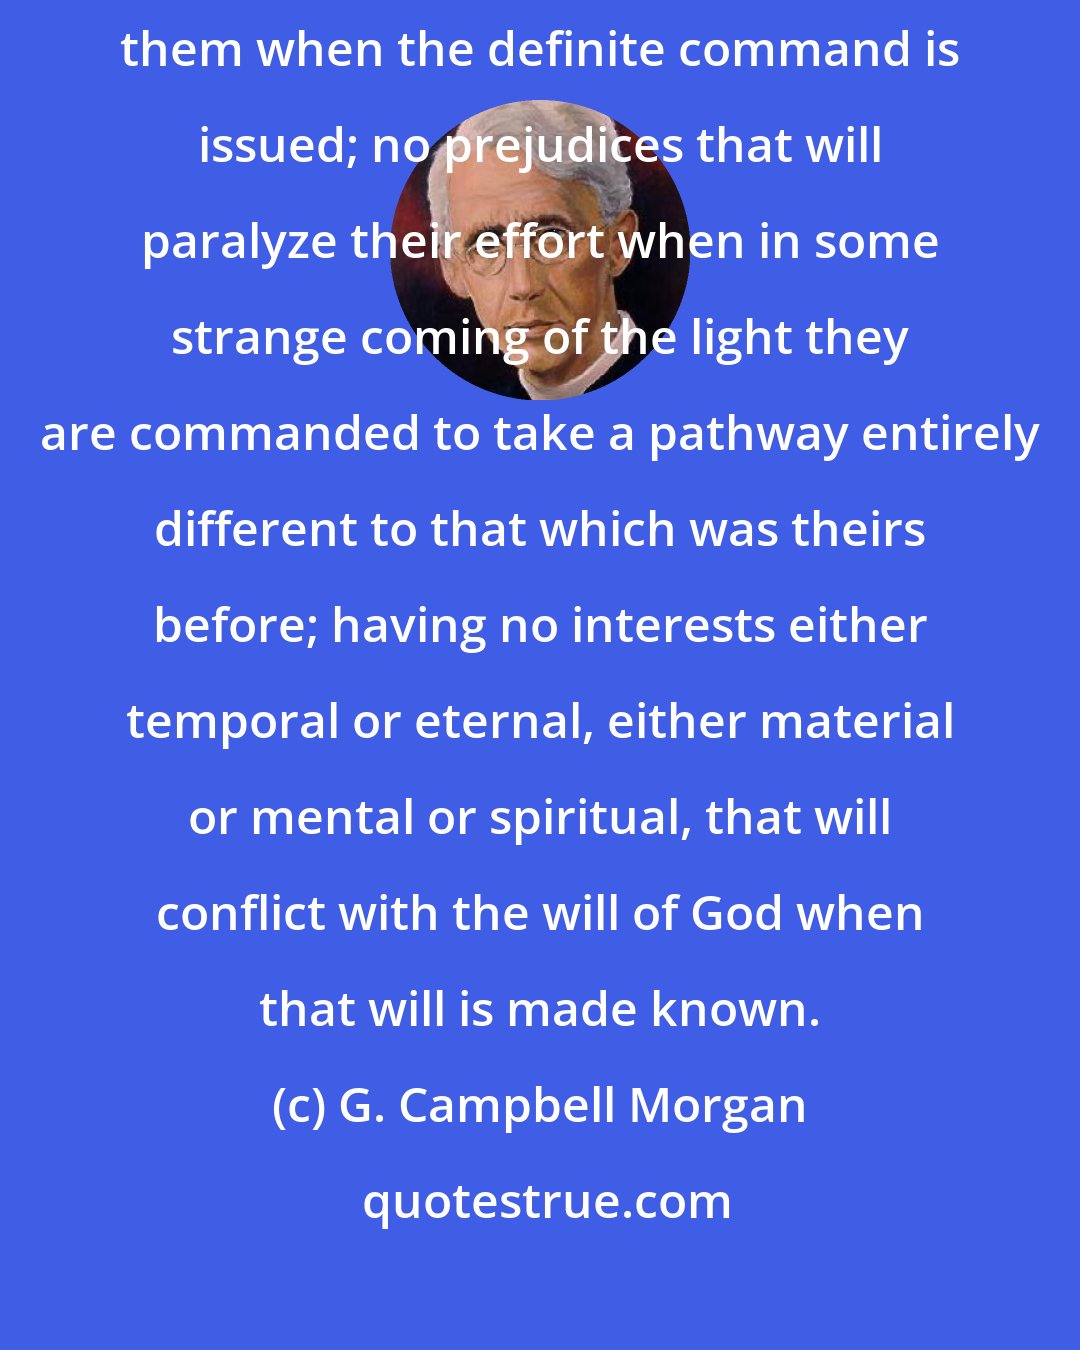 G. Campbell Morgan: Those who wait for God are pilgrim souls that have no tie that will hold them when the definite command is issued; no prejudices that will paralyze their effort when in some strange coming of the light they are commanded to take a pathway entirely different to that which was theirs before; having no interests either temporal or eternal, either material or mental or spiritual, that will conflict with the will of God when that will is made known.